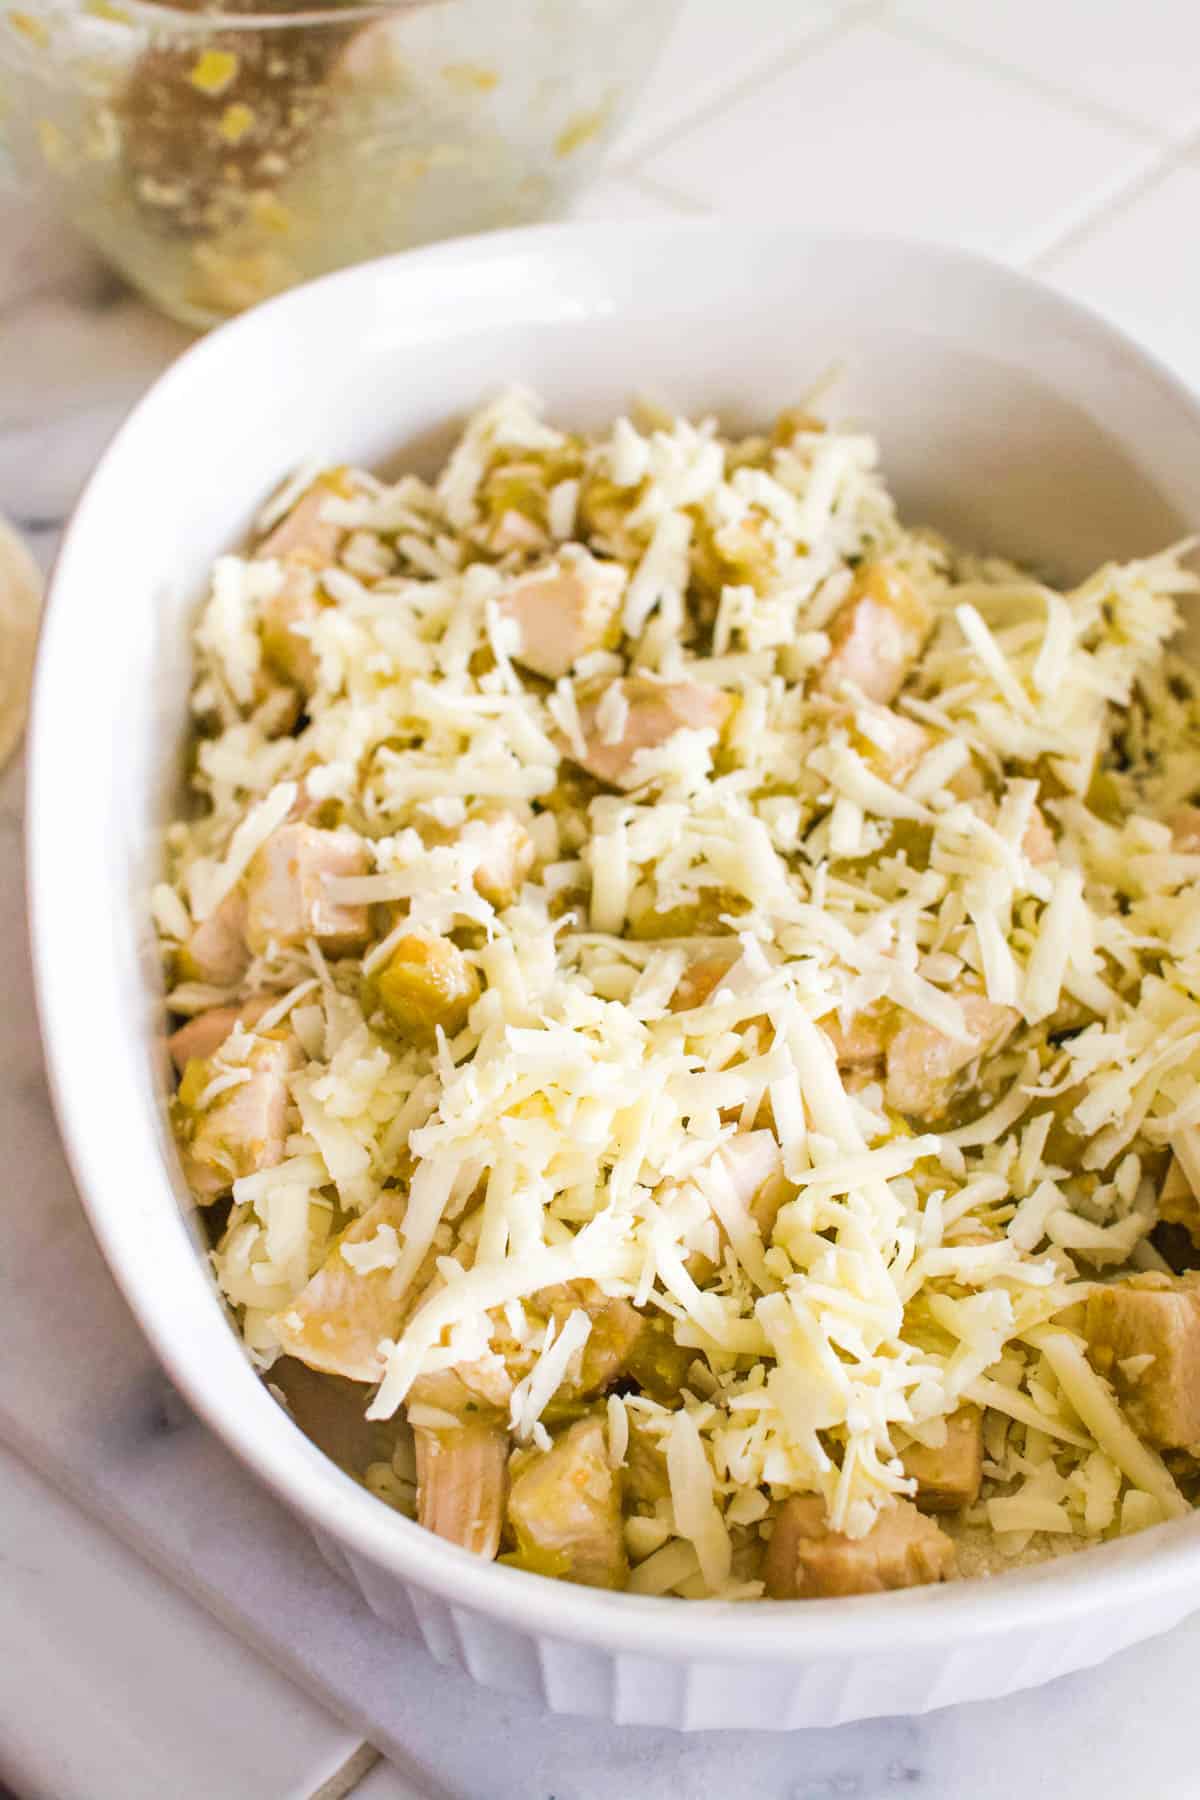 Layered Swiss enchilada casserole with chopped chicken in a baking dish.